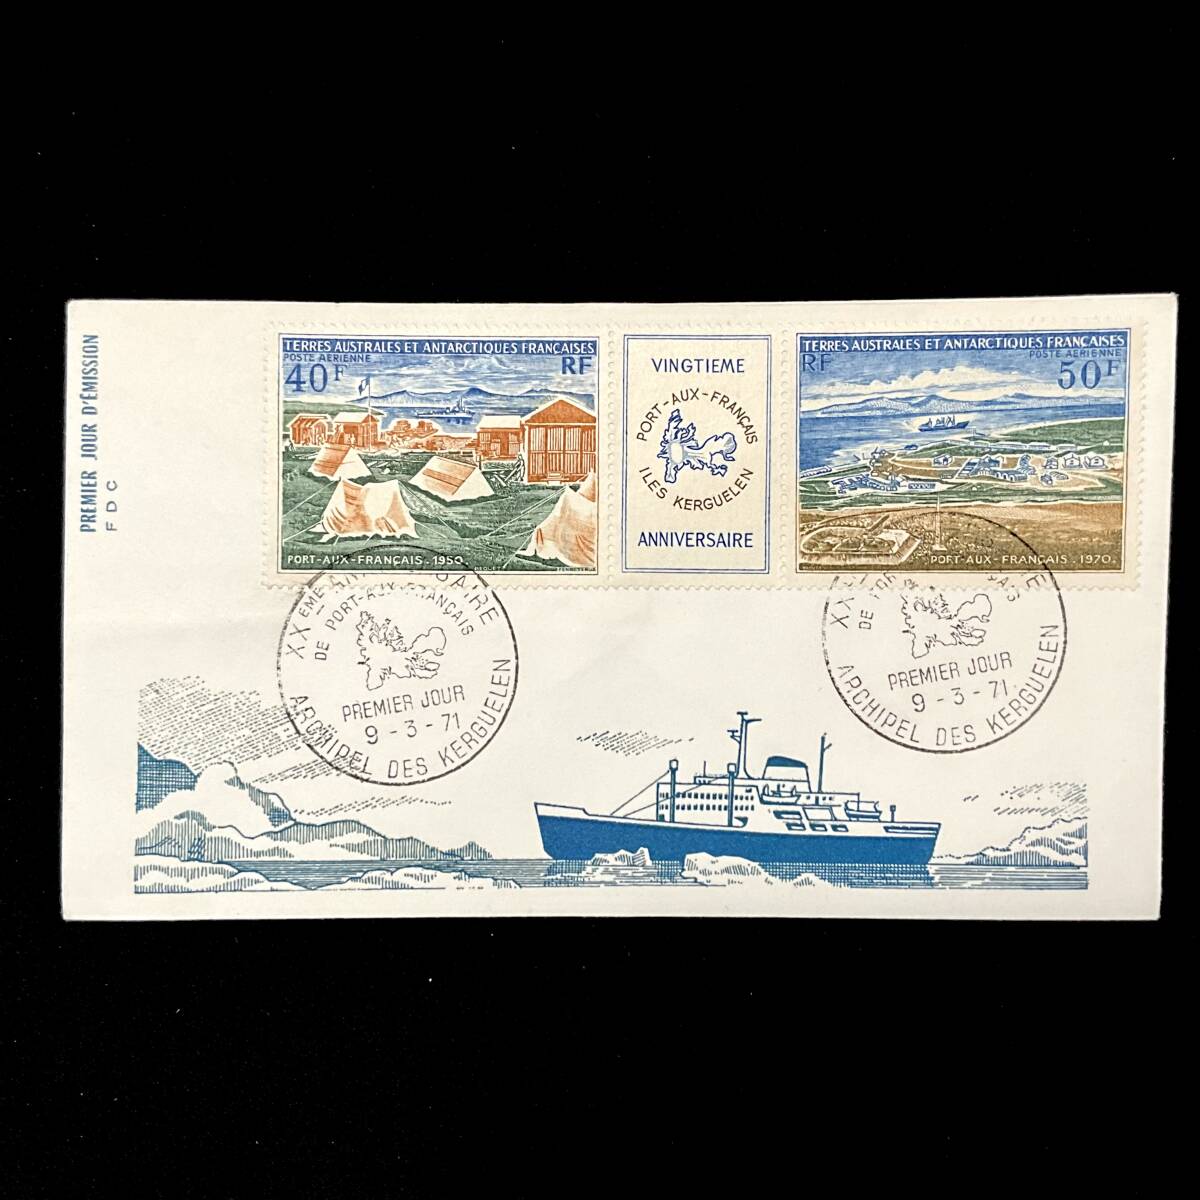  France . south person * south ultimate region keruge Len various island issue basis ground ..20 anniversary FDC the first day seal envelope poruto- franc se stamp 1971 year 3 month 9 day issue 